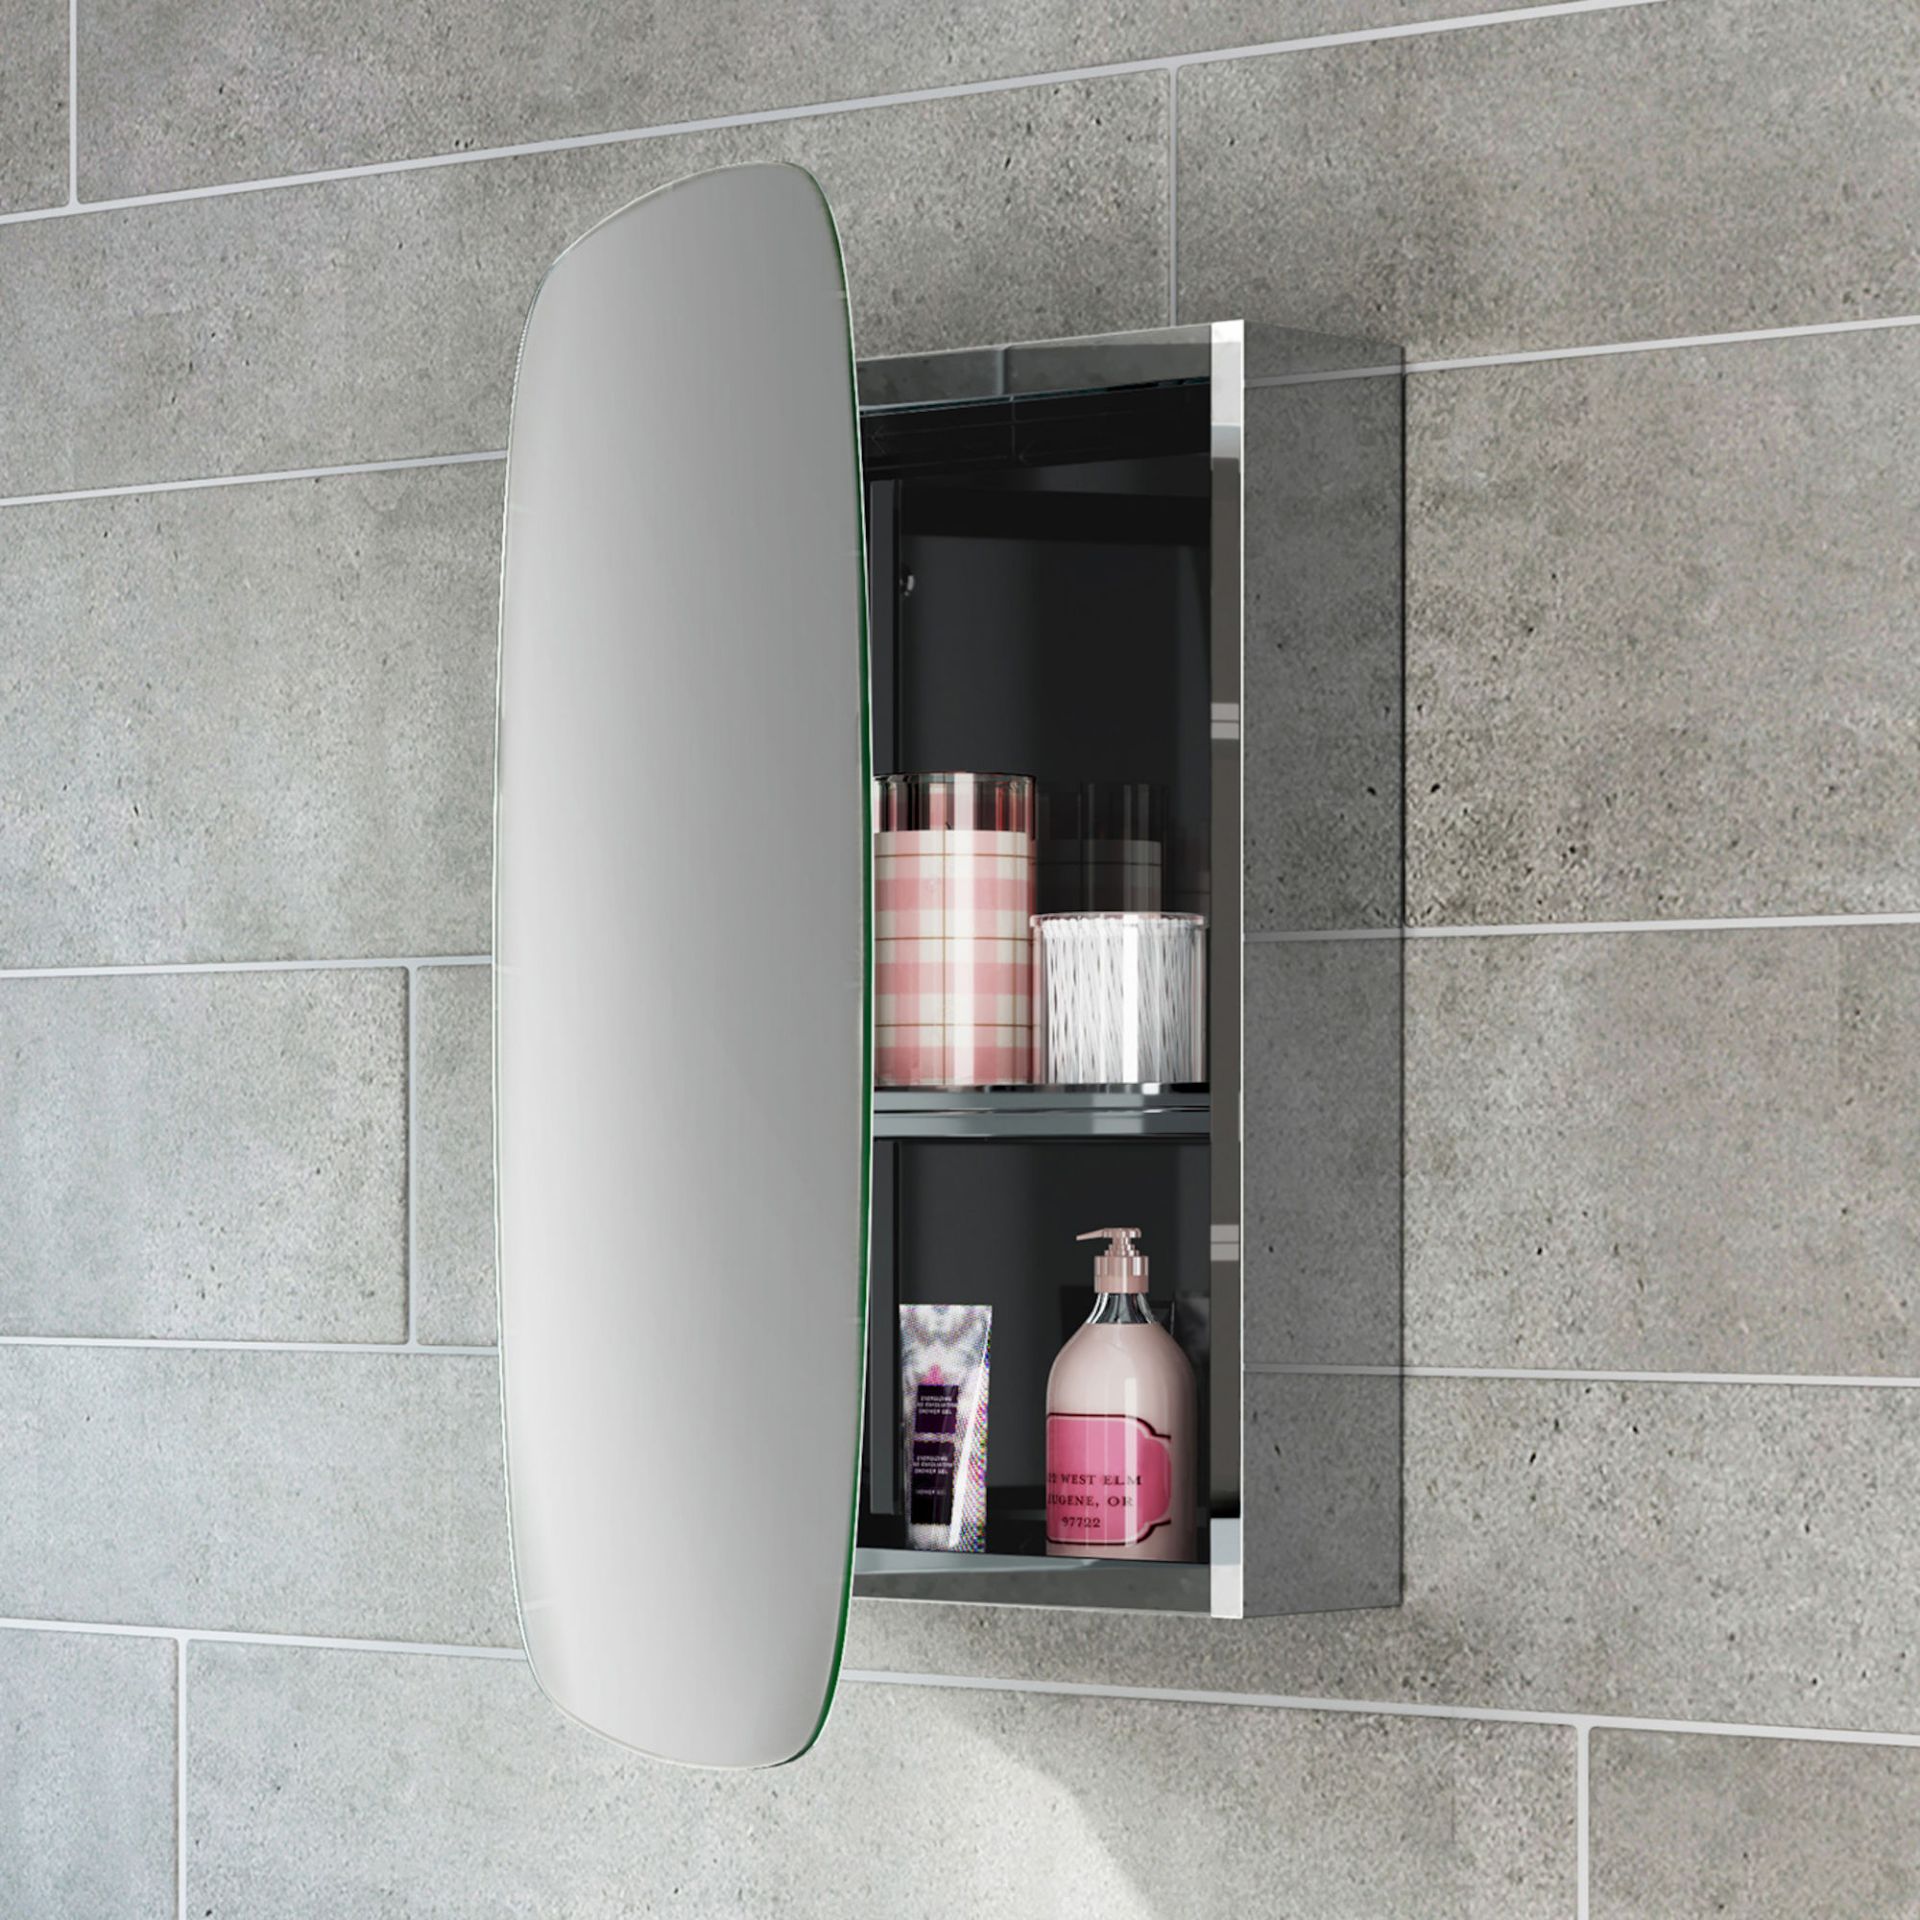 (MT111) 450x600 Curved Rectangular Liberty Stainless Steel Mirror Cabinet. RRP £119.99. Made from